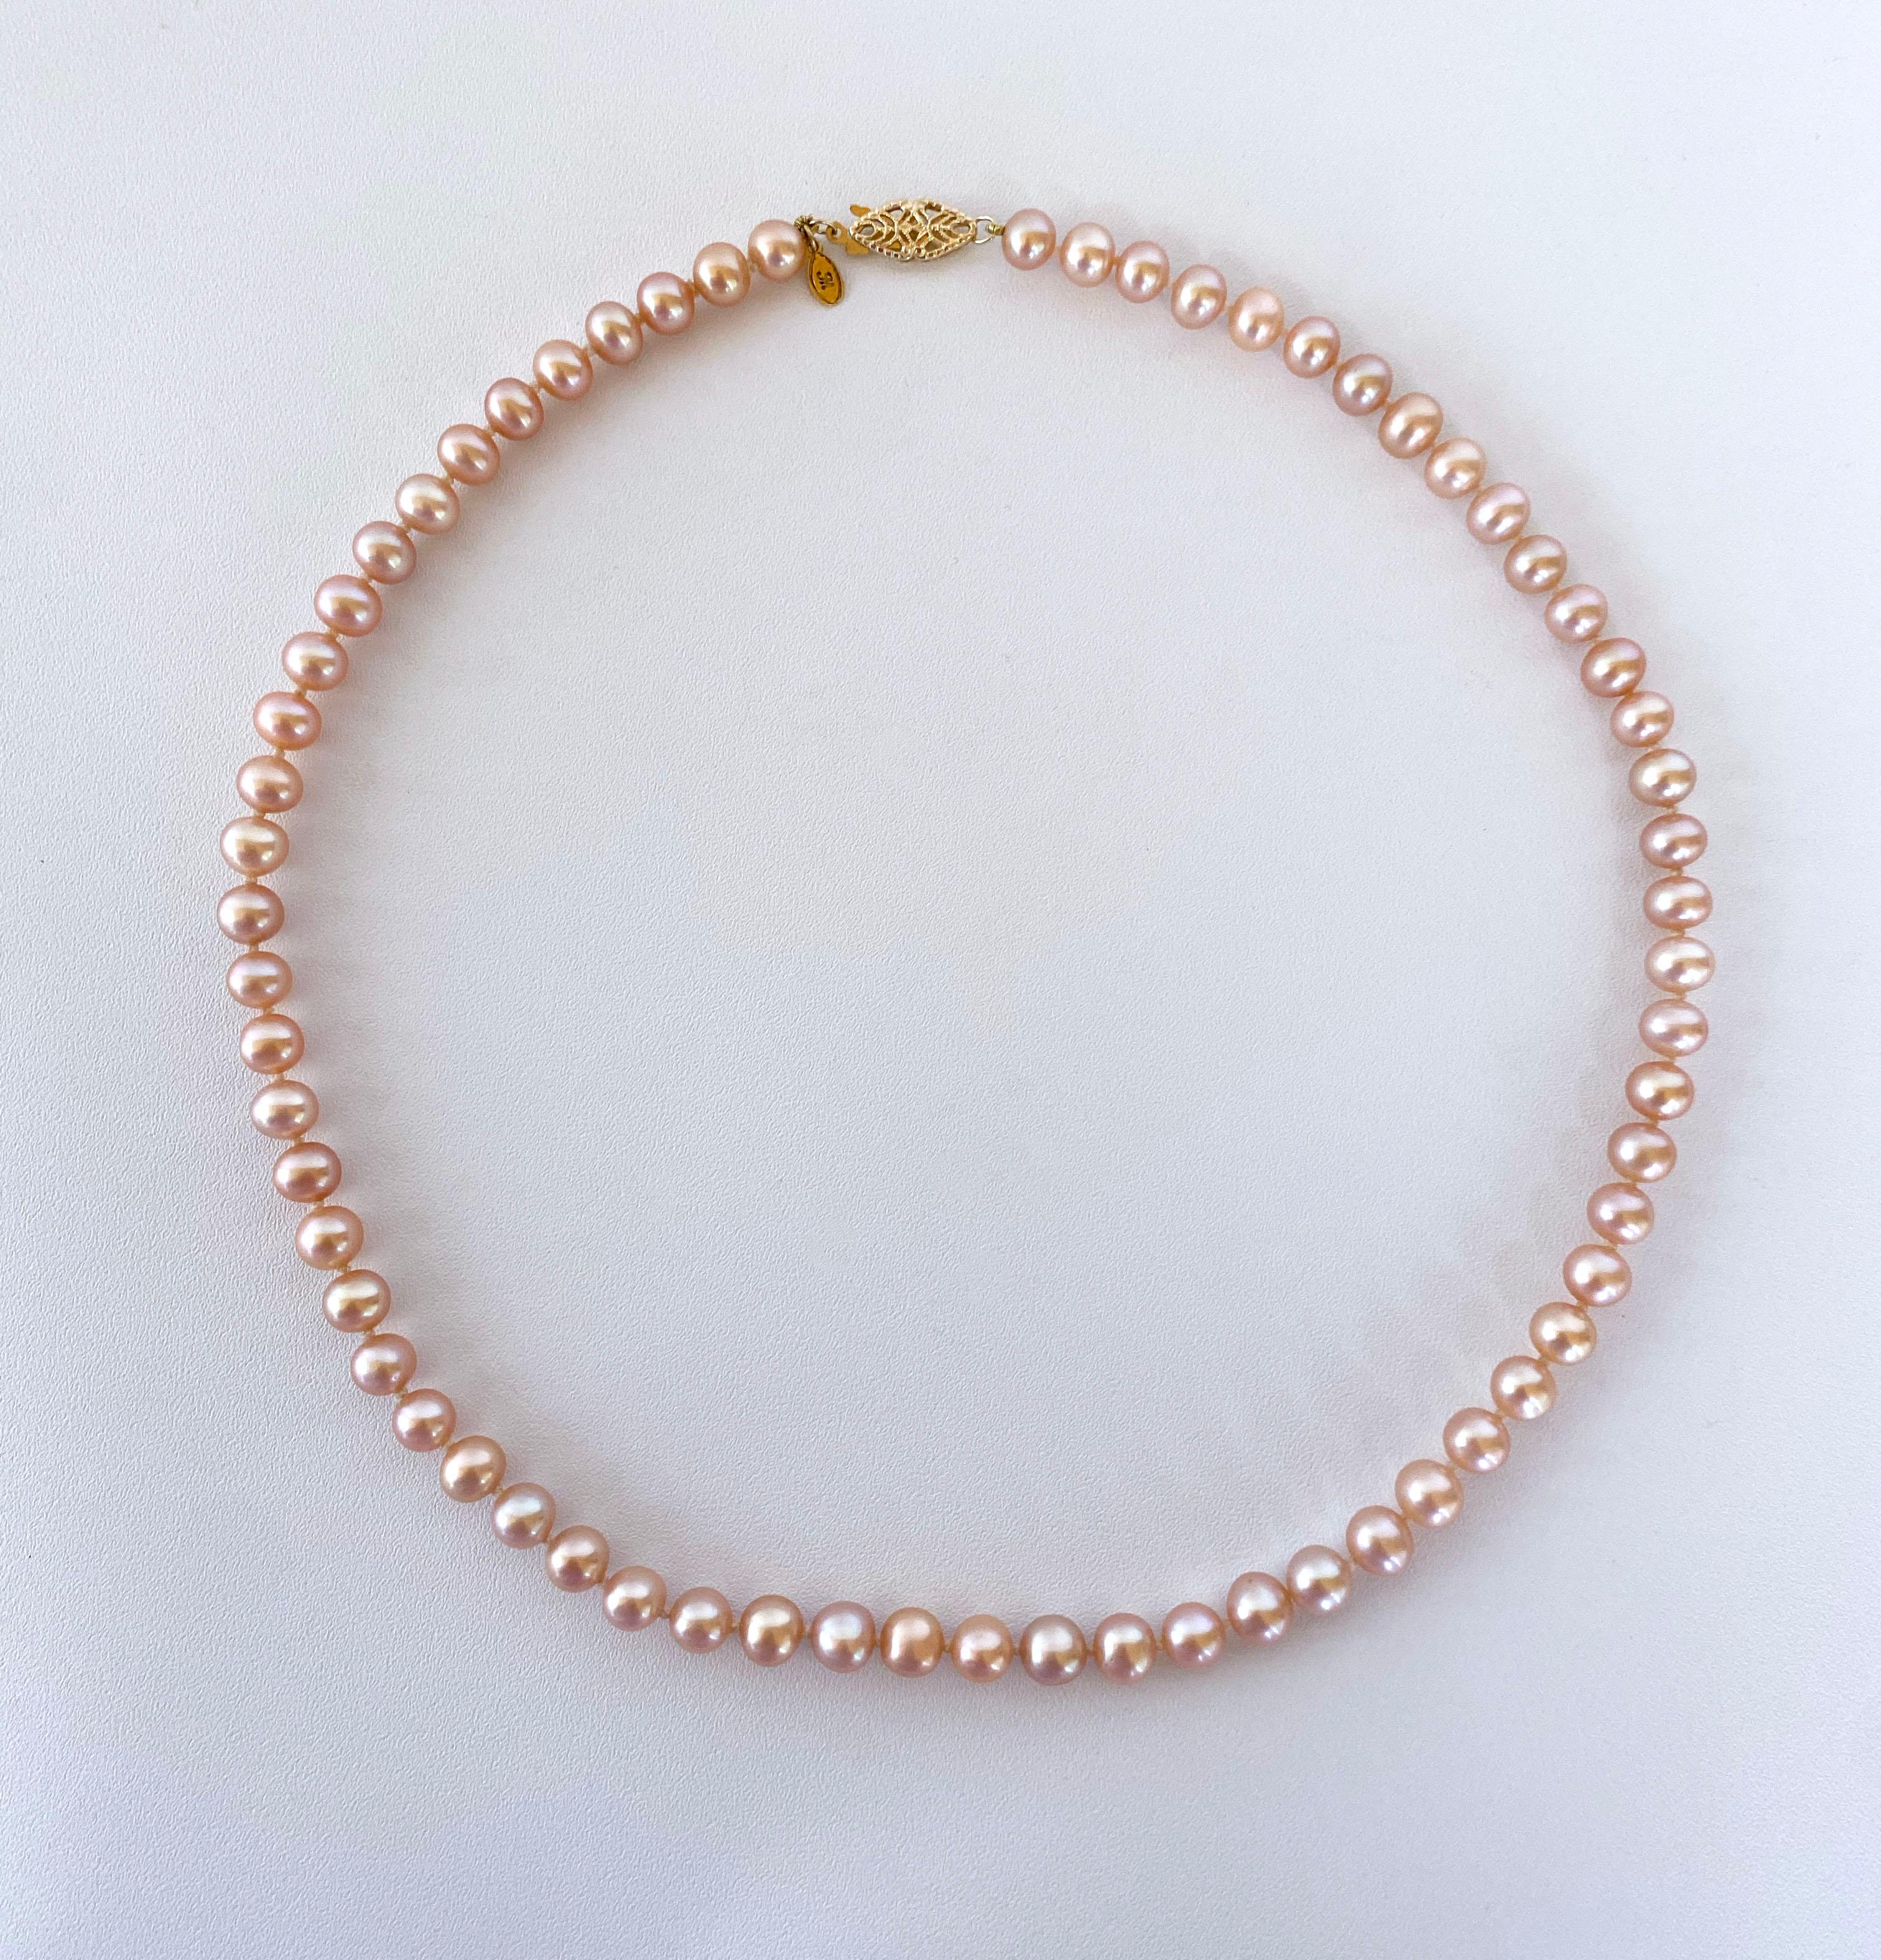 Artisan Marina J. Pink Pearl Necklace with 14k Yellow Gold Filigree Clasp For Sale